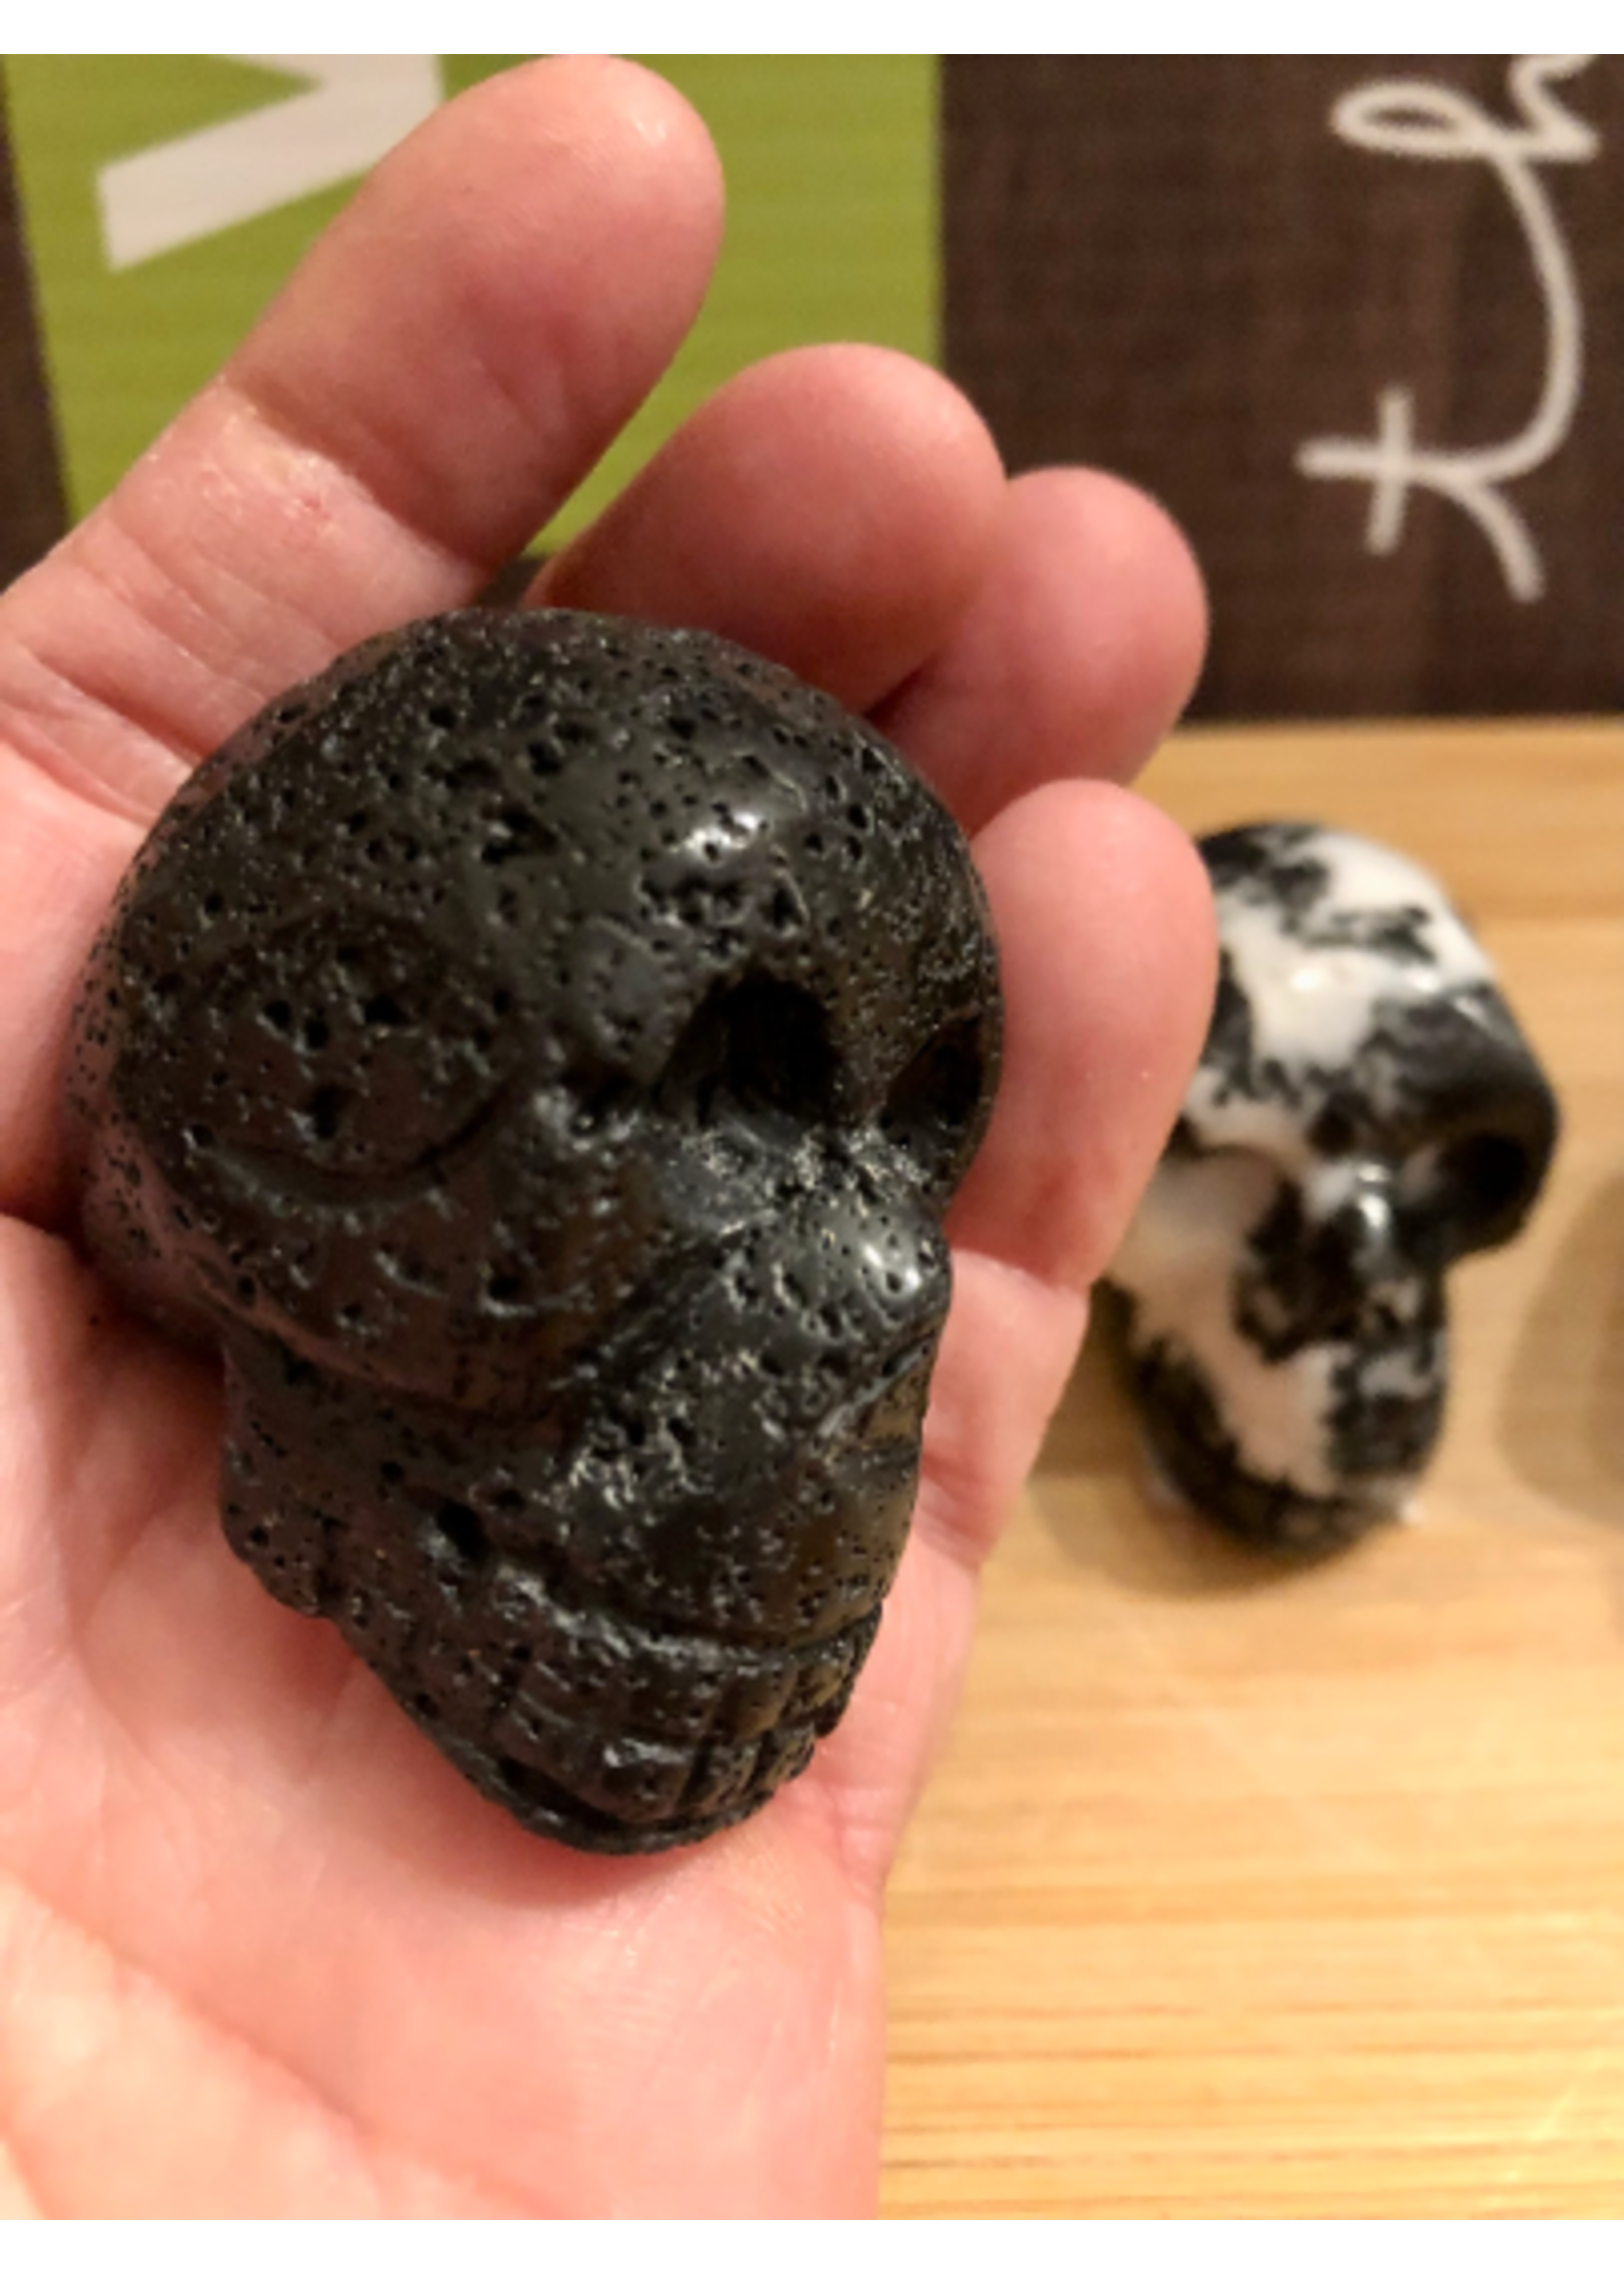 perfect skull stone, lava stone, tiger calcite, known for their healing and healing vibrations, on the physical, mental and spiritual levels